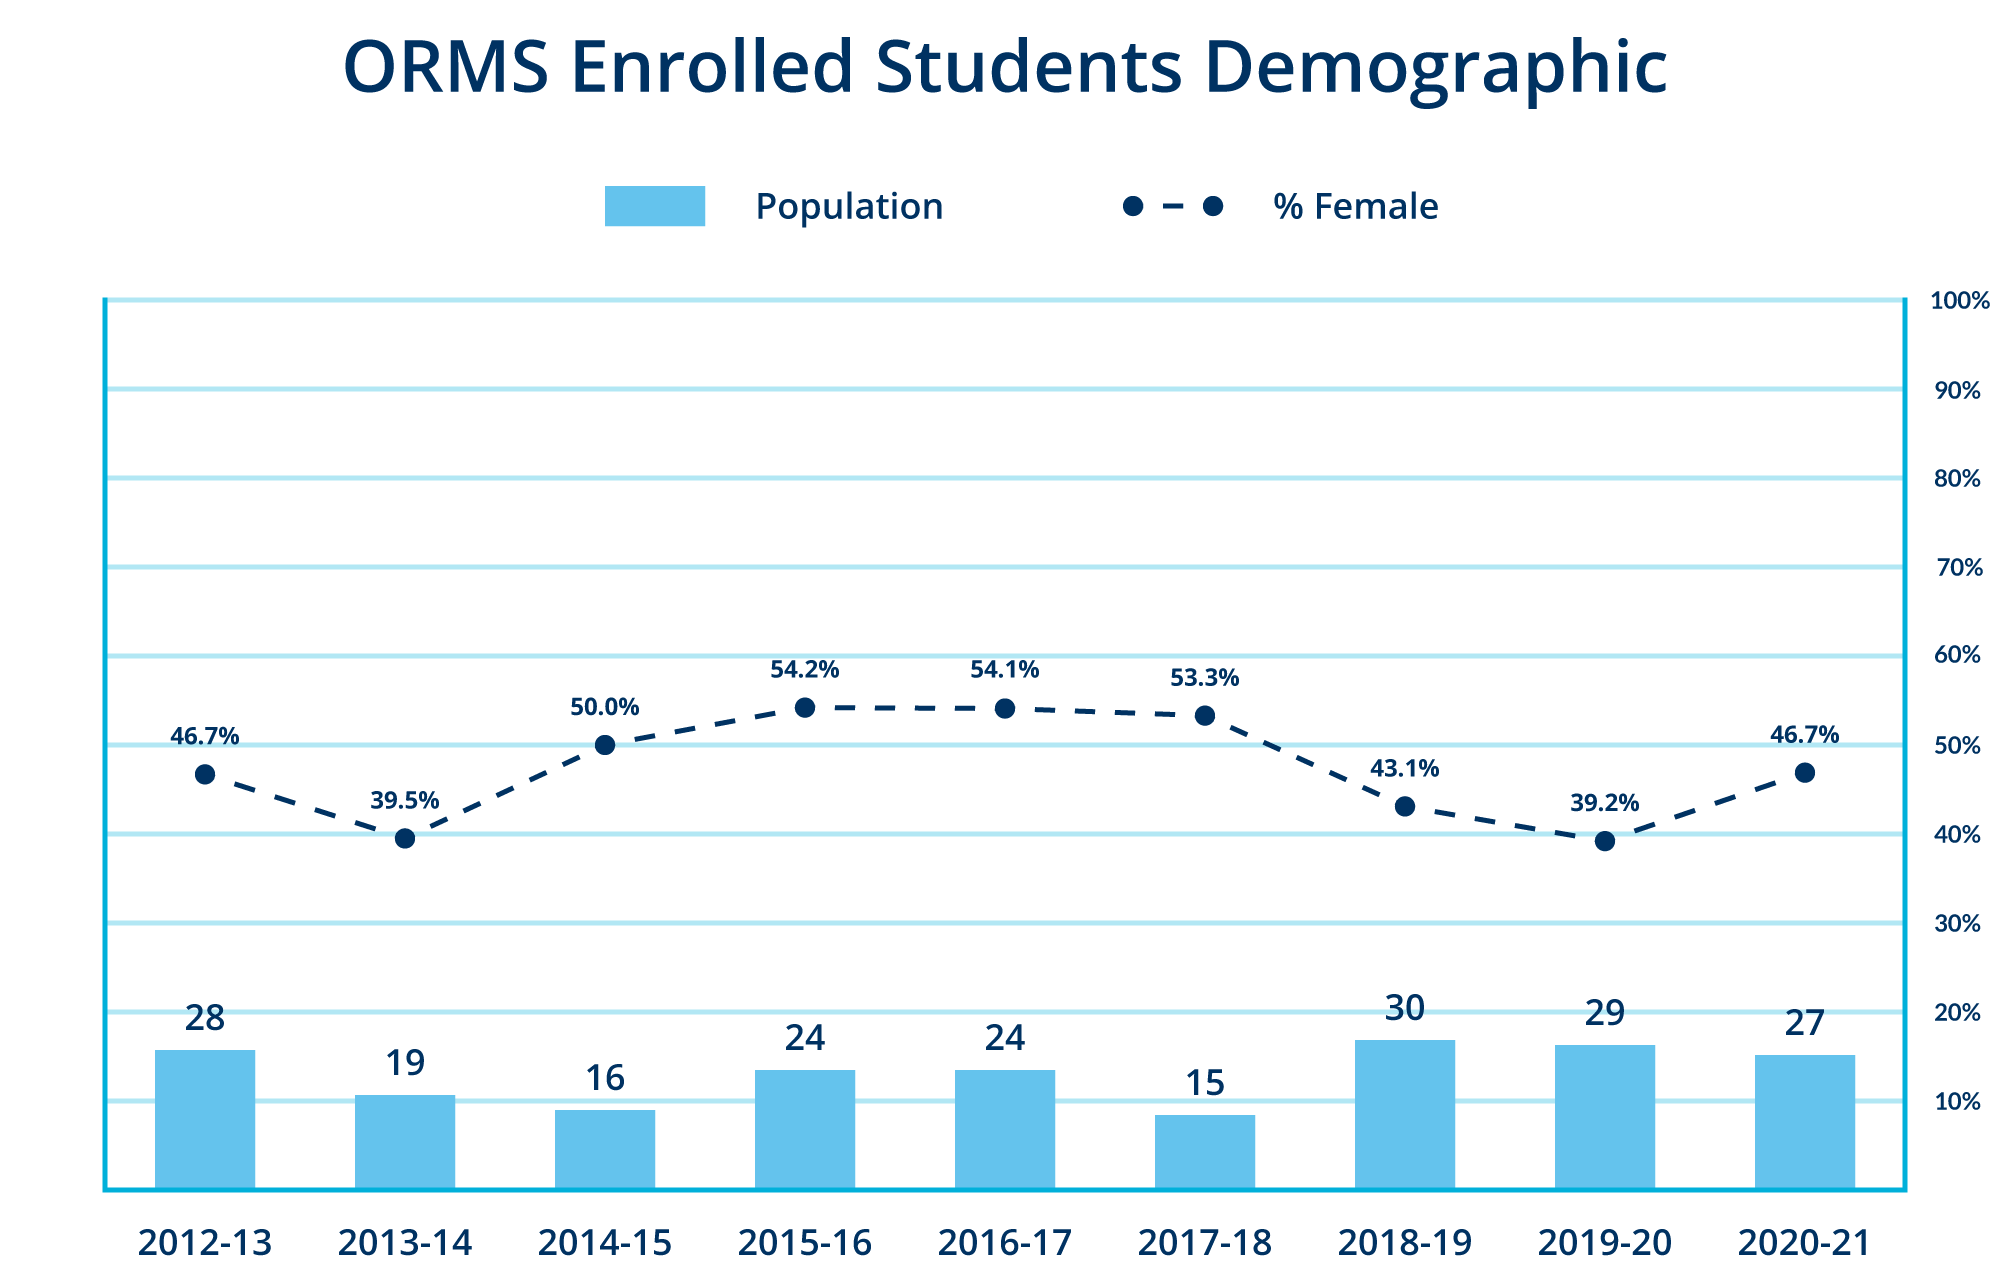 IEOR-Demographic-Infographic-(ORMS)-(RD1)